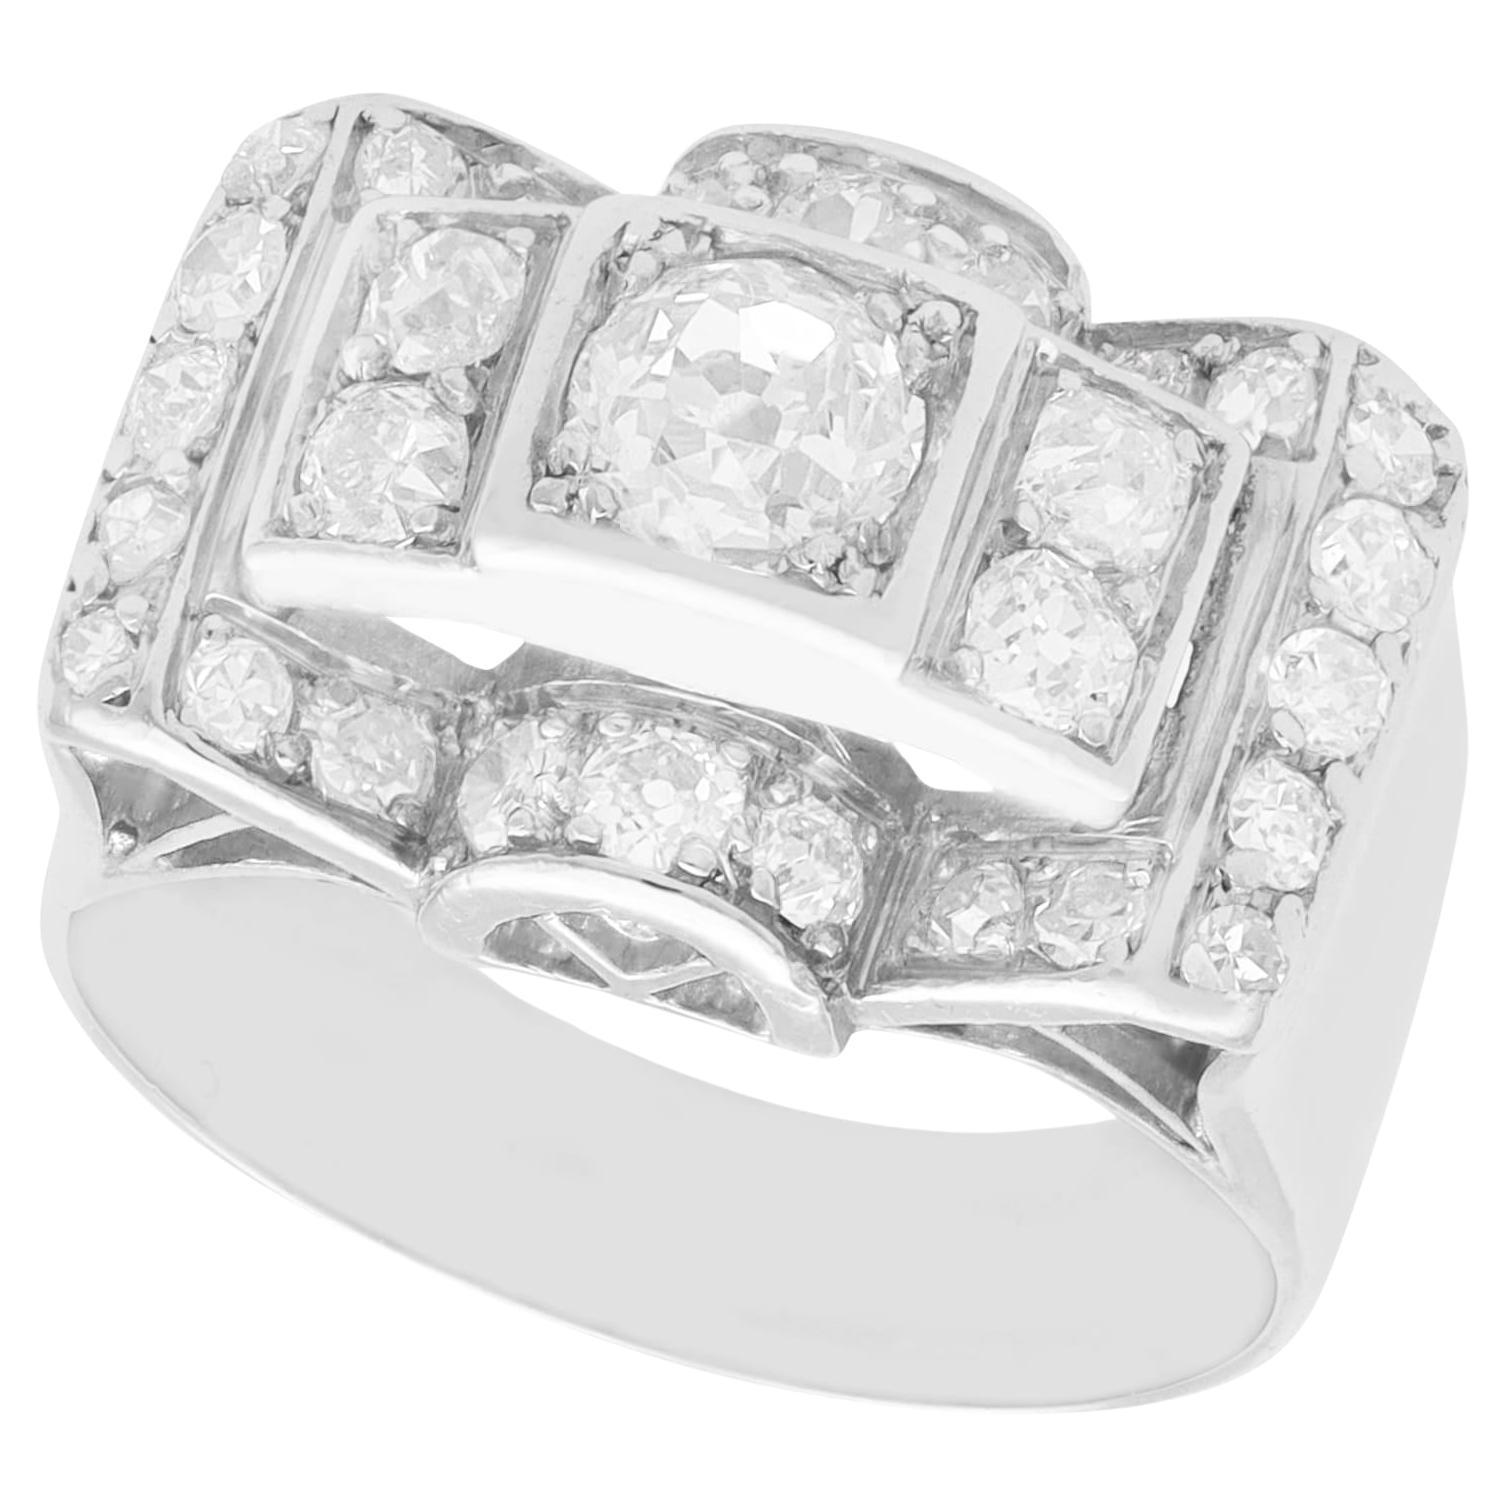 Antique Art Deco 1.45 Carat Diamond and White Gold Cocktail Ring For Sale